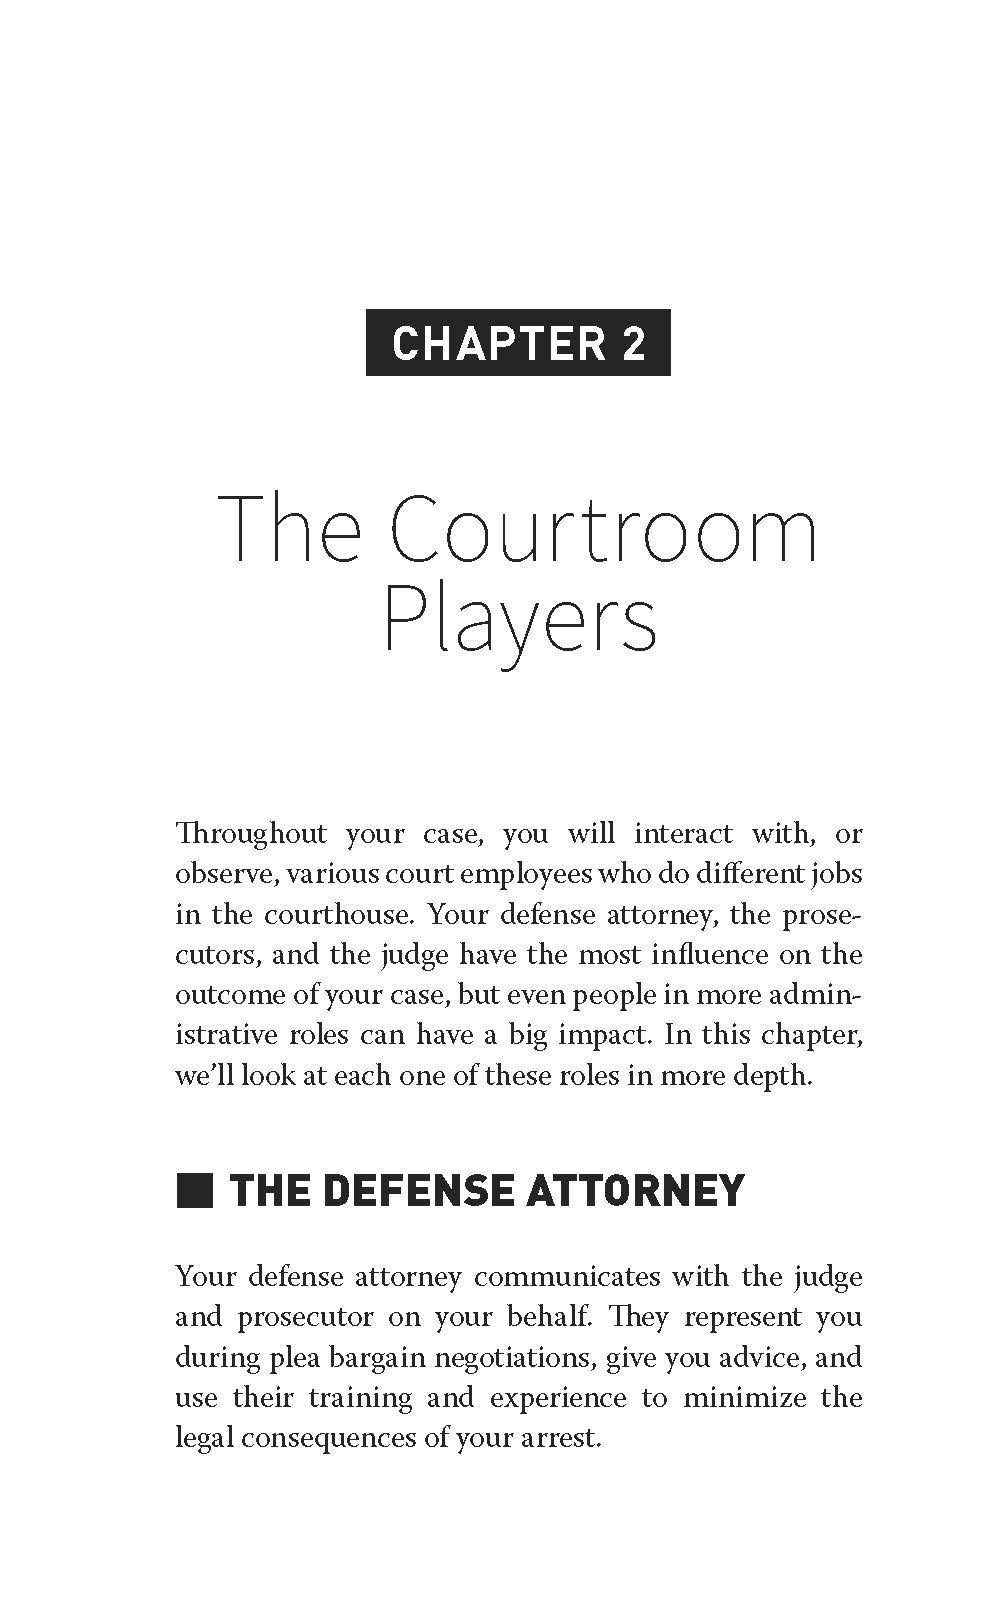 Sample_of_Defendant_s_Guide_to_Defense_Page_21.jpg